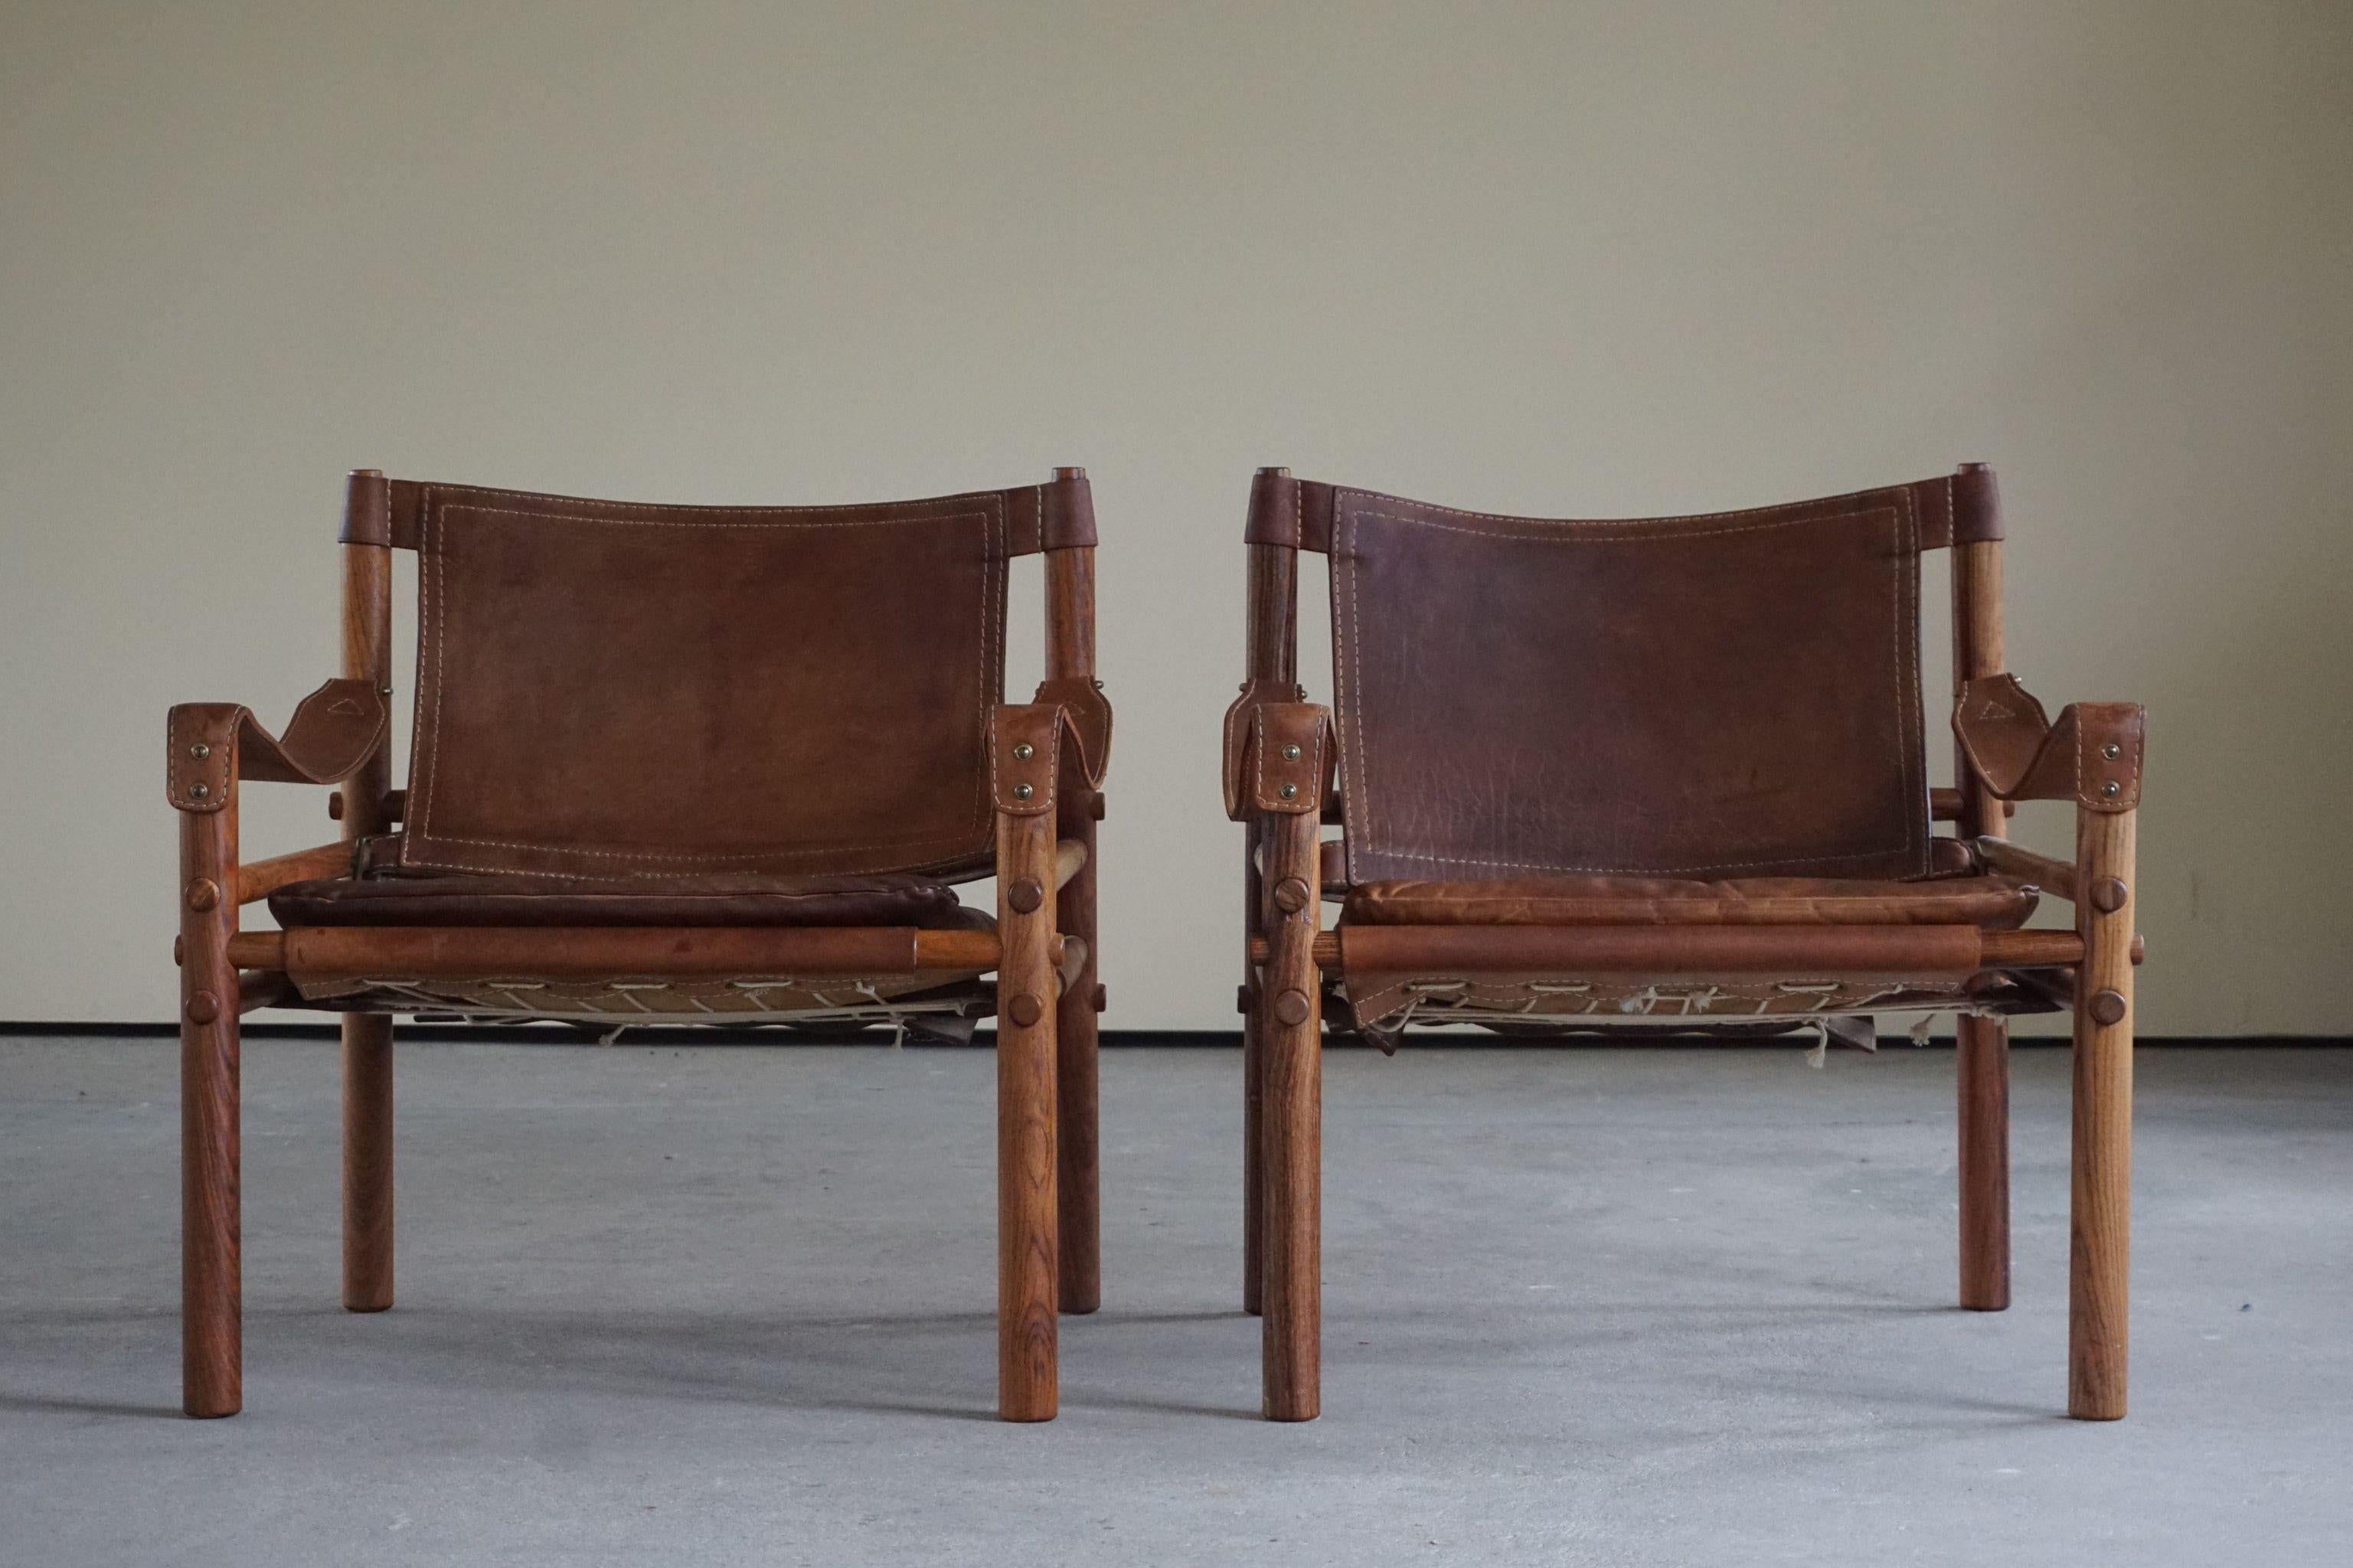 Pair of Sirocco Safari Chairs, Made by Arne Norell AB in Aneby Sweden, 1960s 2